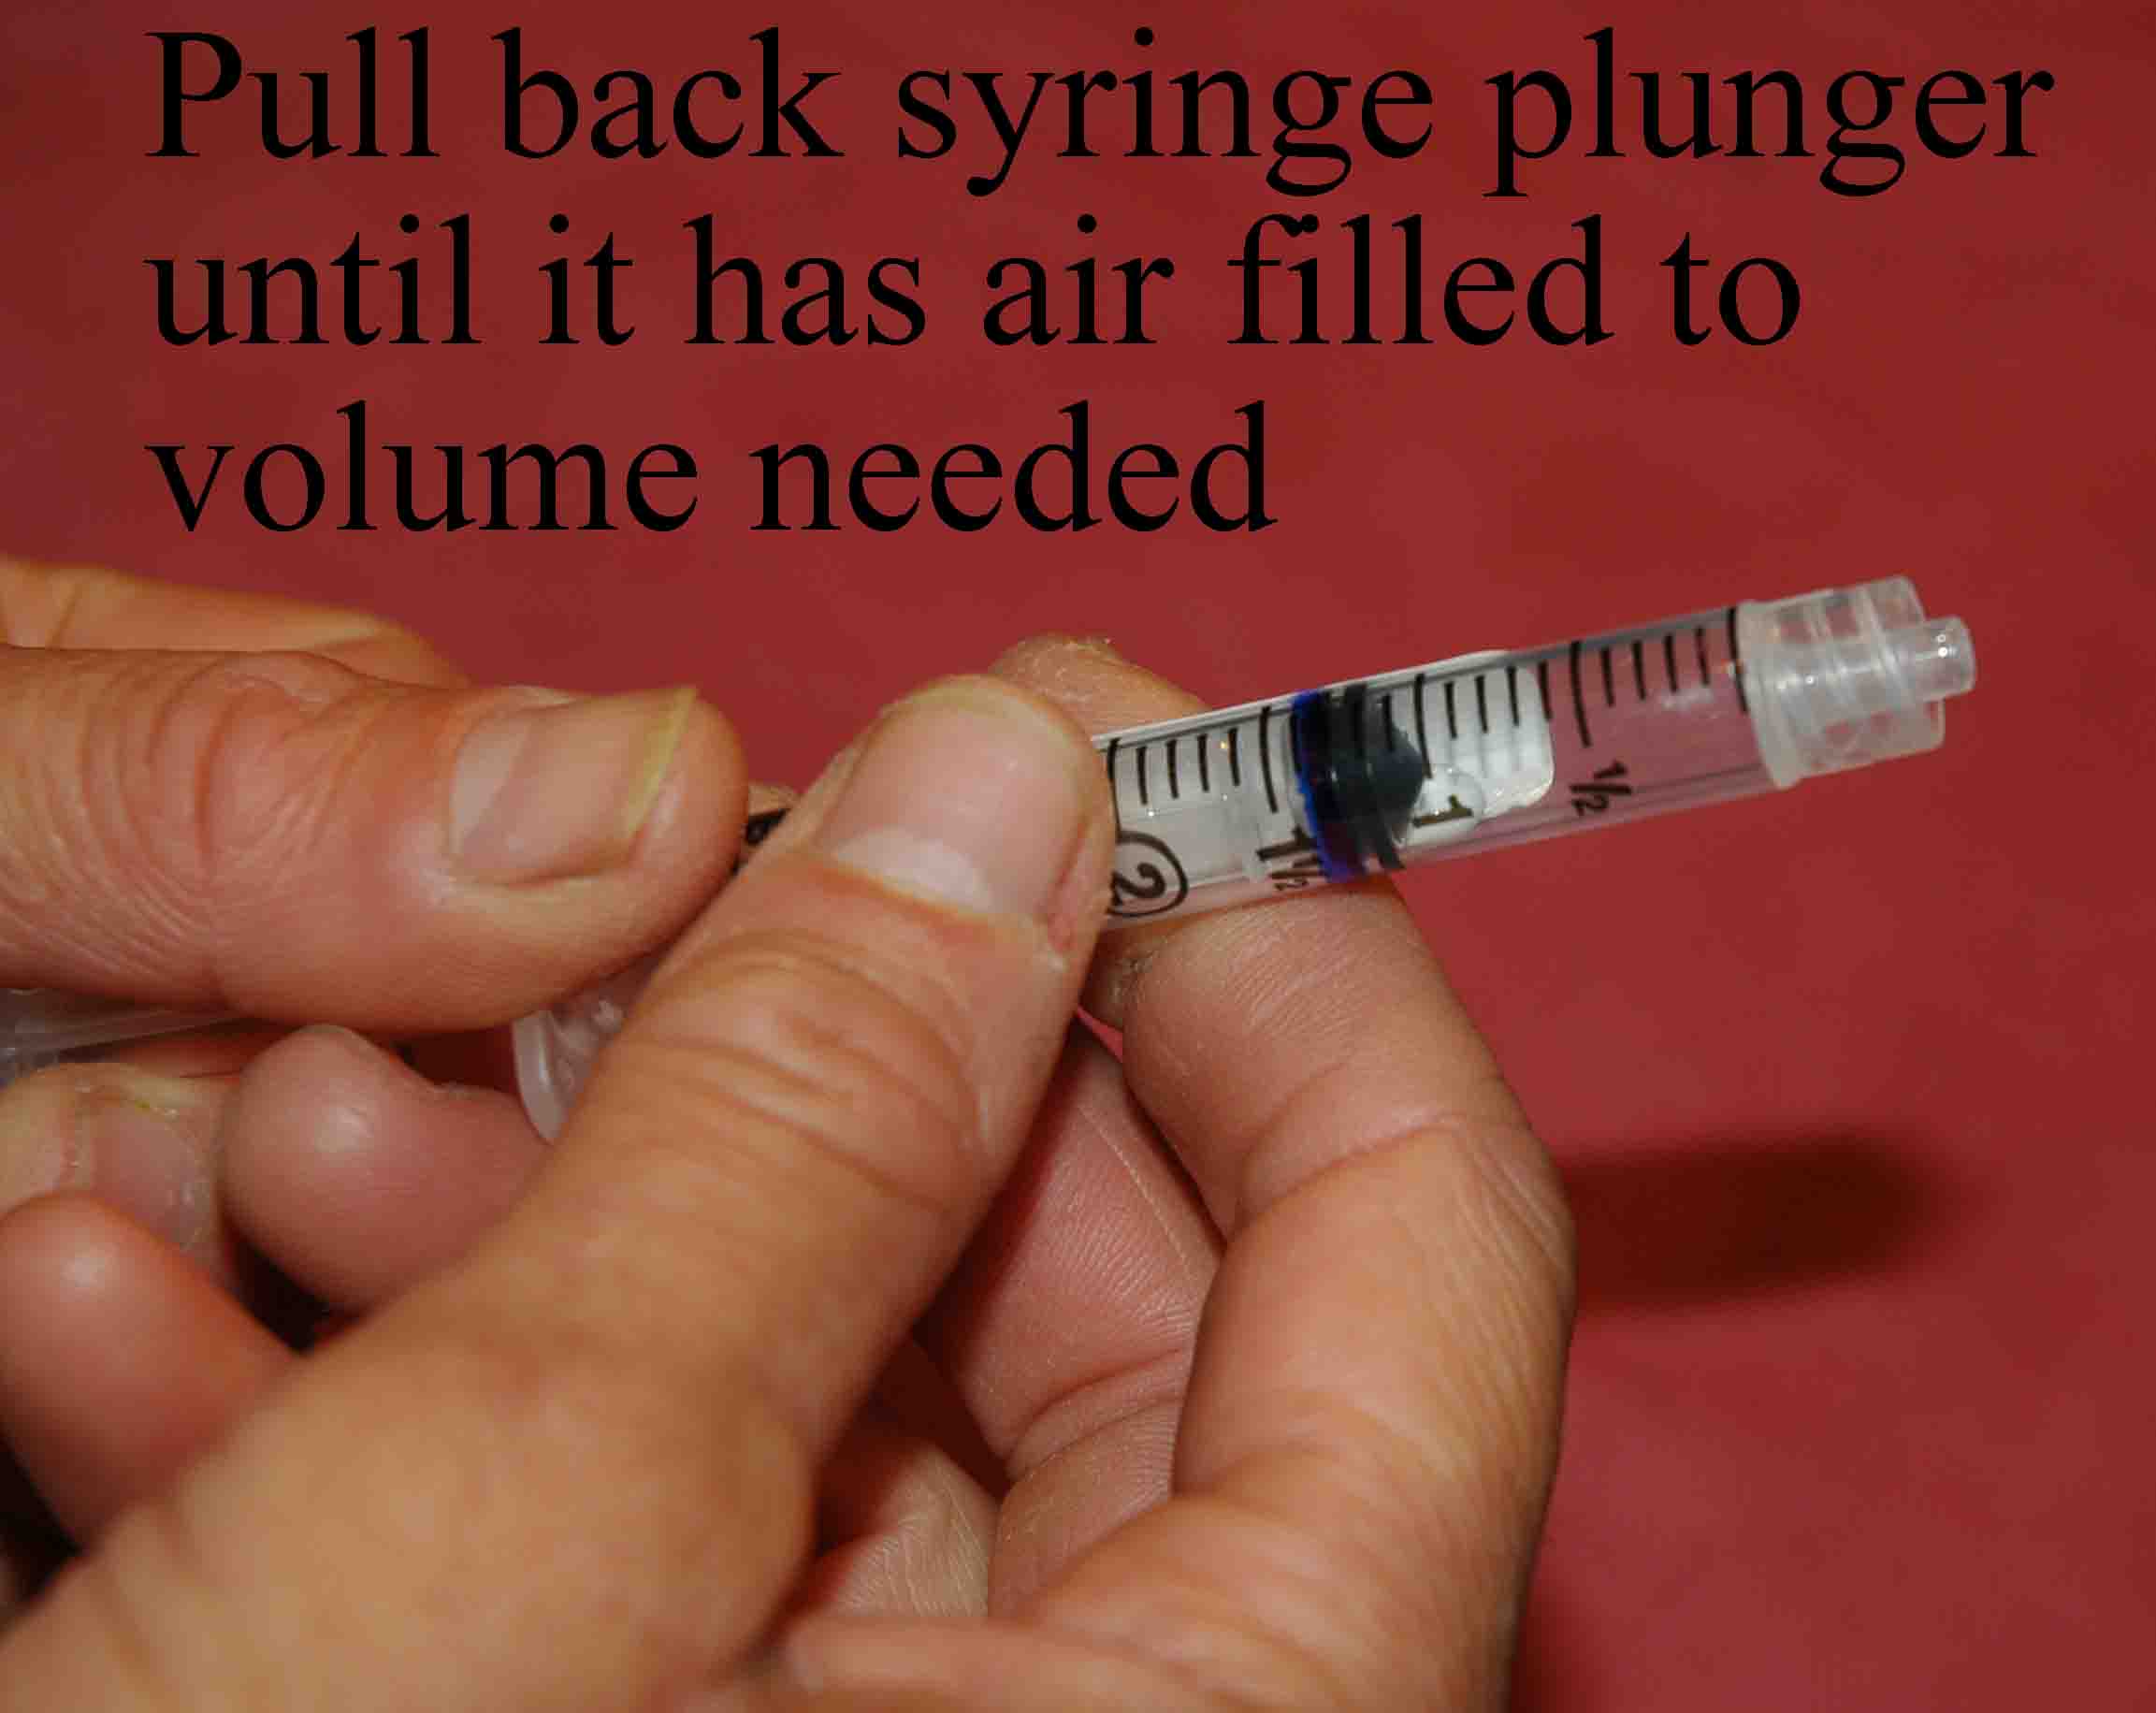 Syringe plunger pulled back to fill with air prior to connecting to the vial.